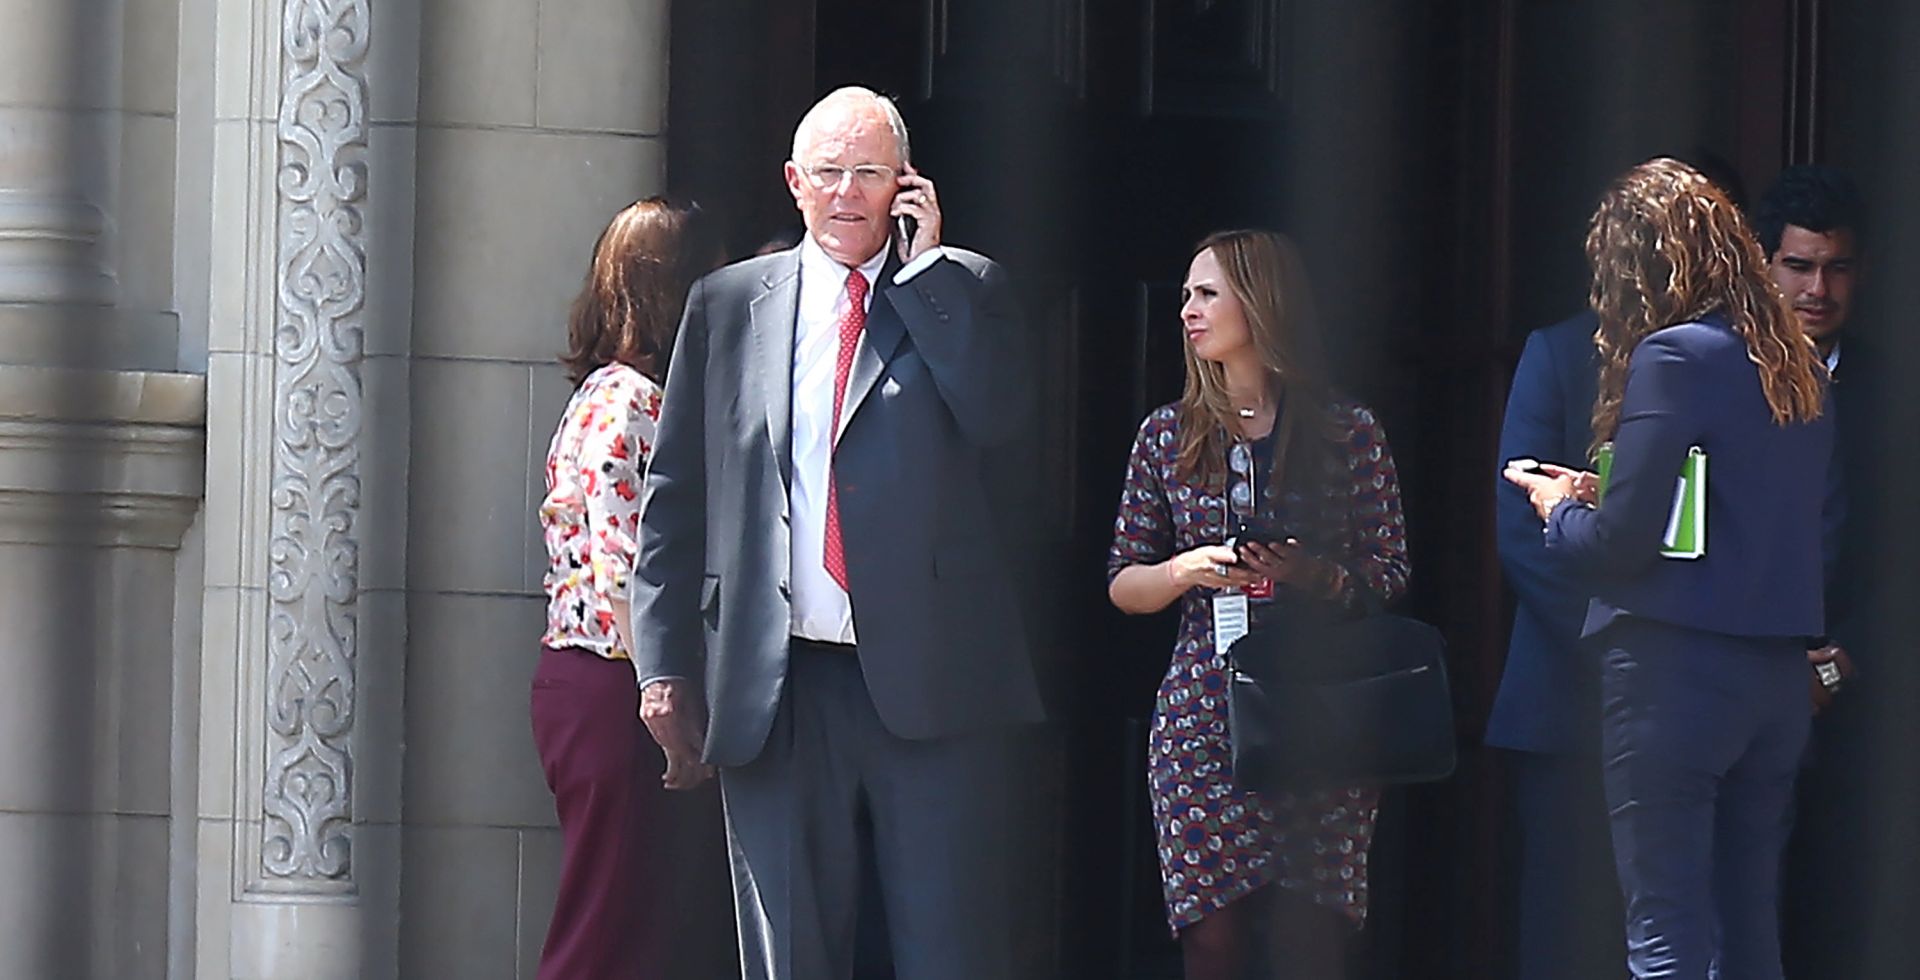 epa06618876 Peruvian President Pedro Pablo Kuczynski leaves the Government Palace after bidding farewell to servants and workers, after the confirmation of his resignation, in Lima, Peru, 21 March 2018. Government sources confirmed to EFE that Peruvian President Pedro Pablo Kuczynski presented his resignation amid political crisis caused by the disclosure of video and audio clips that evidence attempts of vote purchase by political allies to avoid his dismissal.  EPA/Ernesto Arias